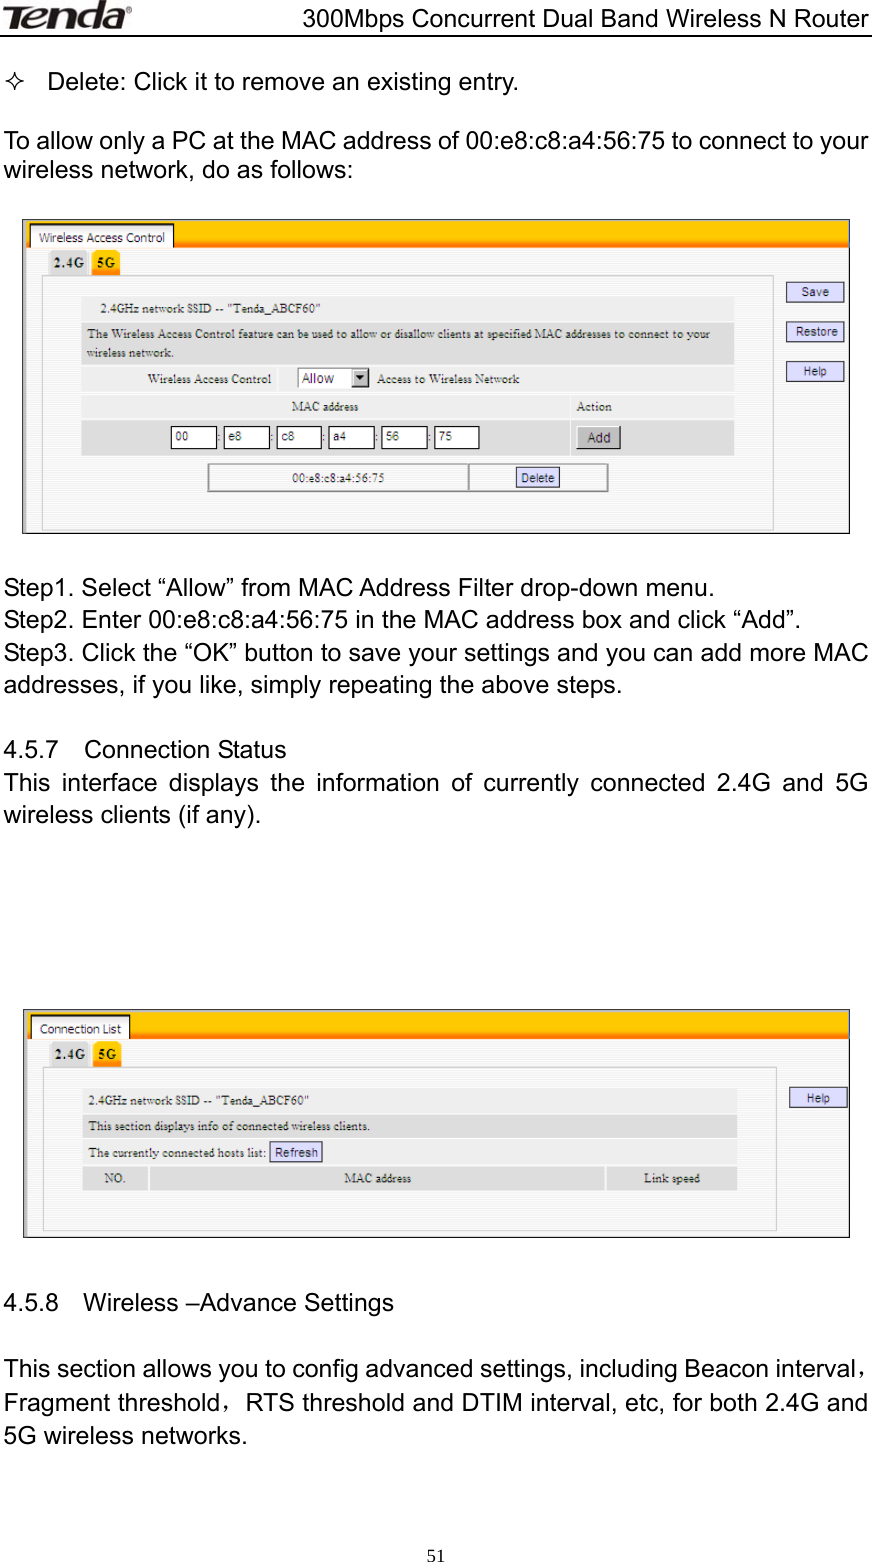                       300Mbps Concurrent Dual Band Wireless N Router  51  Delete: Click it to remove an existing entry.    To allow only a PC at the MAC address of 00:e8:c8:a4:56:75 to connect to your wireless network, do as follows:    Step1. Select “Allow” from MAC Address Filter drop-down menu. Step2. Enter 00:e8:c8:a4:56:75 in the MAC address box and click “Add”. Step3. Click the “OK” button to save your settings and you can add more MAC addresses, if you like, simply repeating the above steps.  4.5.7  Connection Status This interface displays the information of currently connected 2.4G and 5G wireless clients (if any).        4.5.8  Wireless –Advance Settings  This section allows you to config advanced settings, including Beacon interval，Fragment threshold，RTS threshold and DTIM interval, etc, for both 2.4G and 5G wireless networks.  